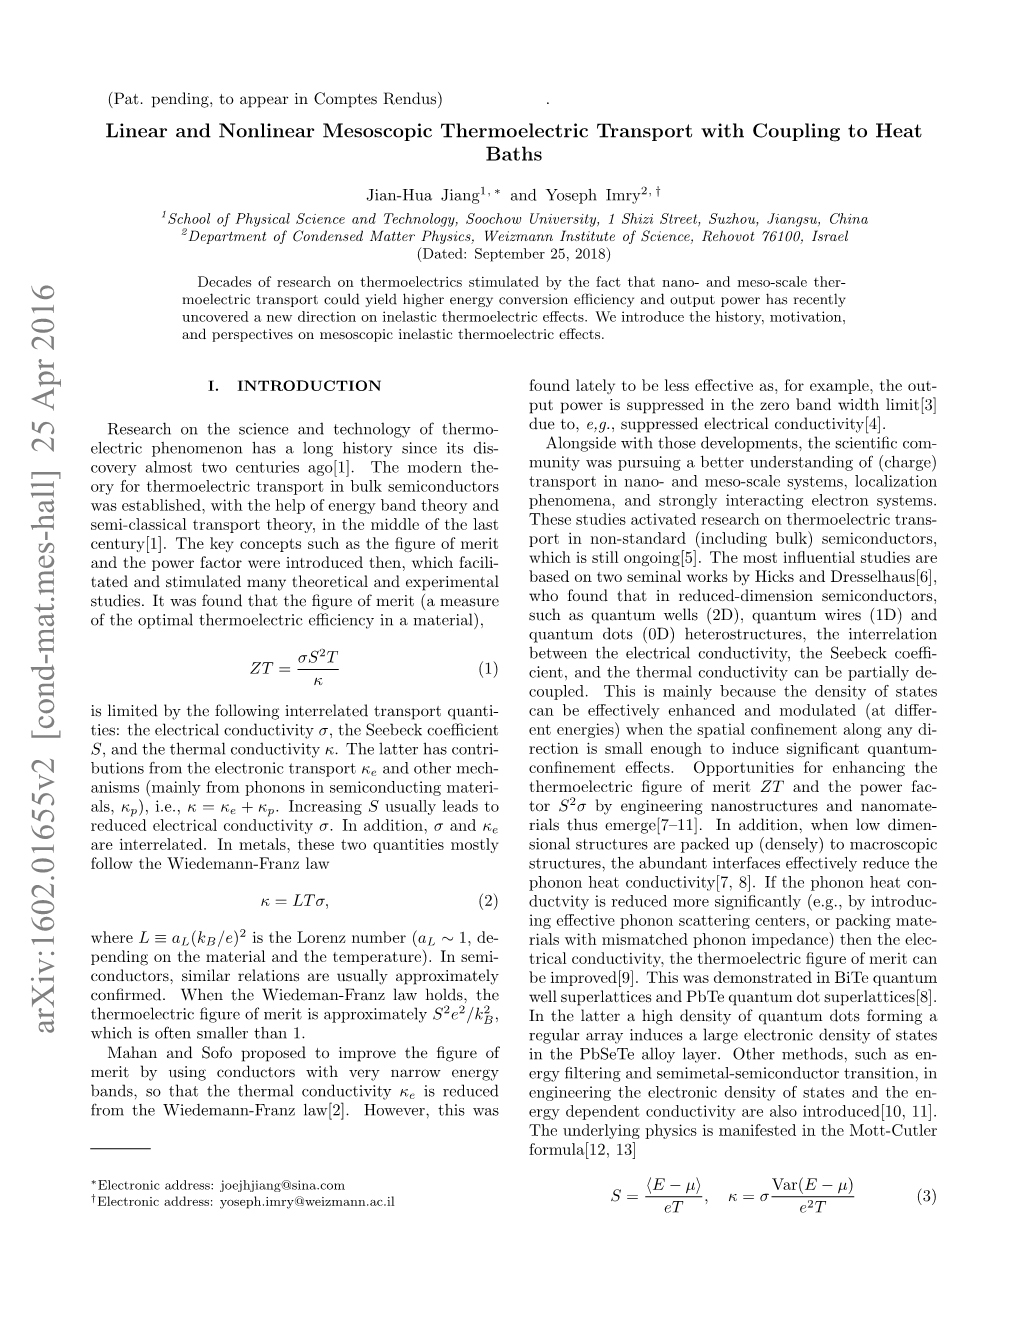 Arxiv:1602.01655V2 [Cond-Mat.Mes-Hall] 25 Apr 2016 Which Is Often Smaller Than 1